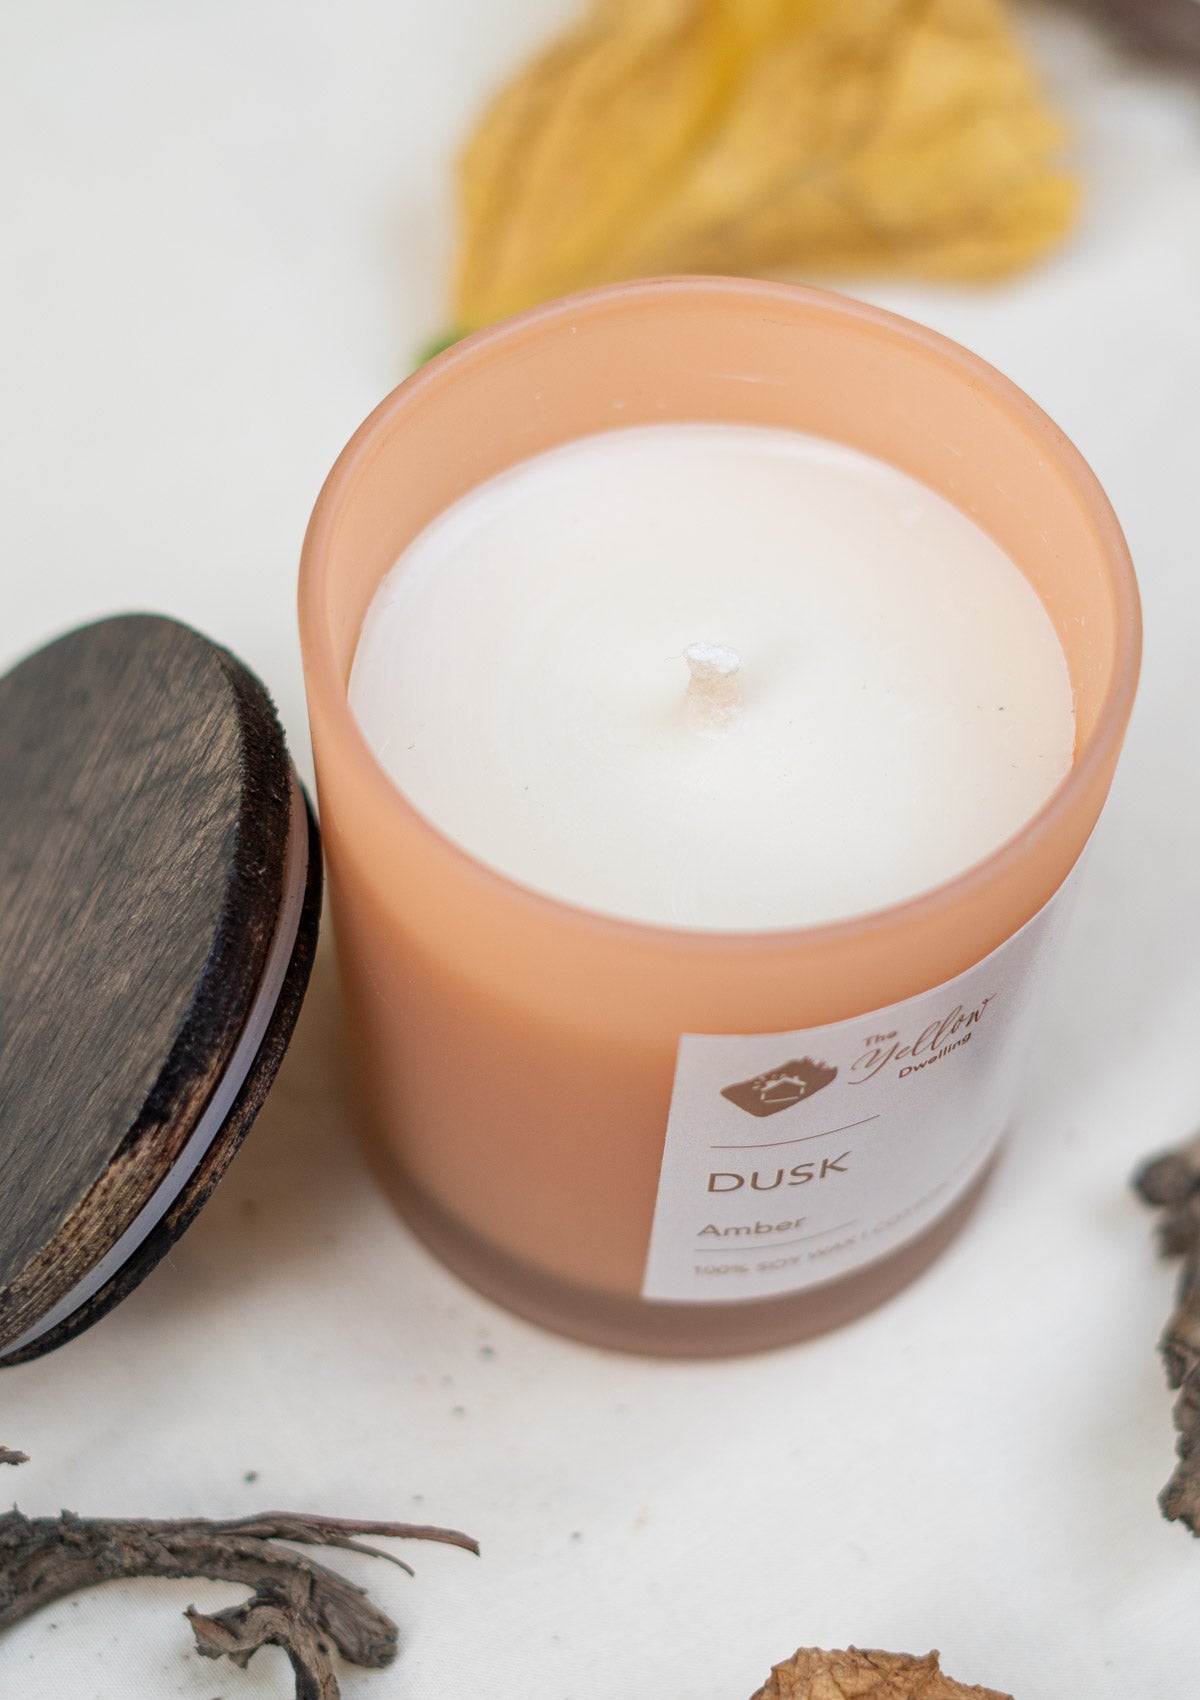 Dusk scented candle